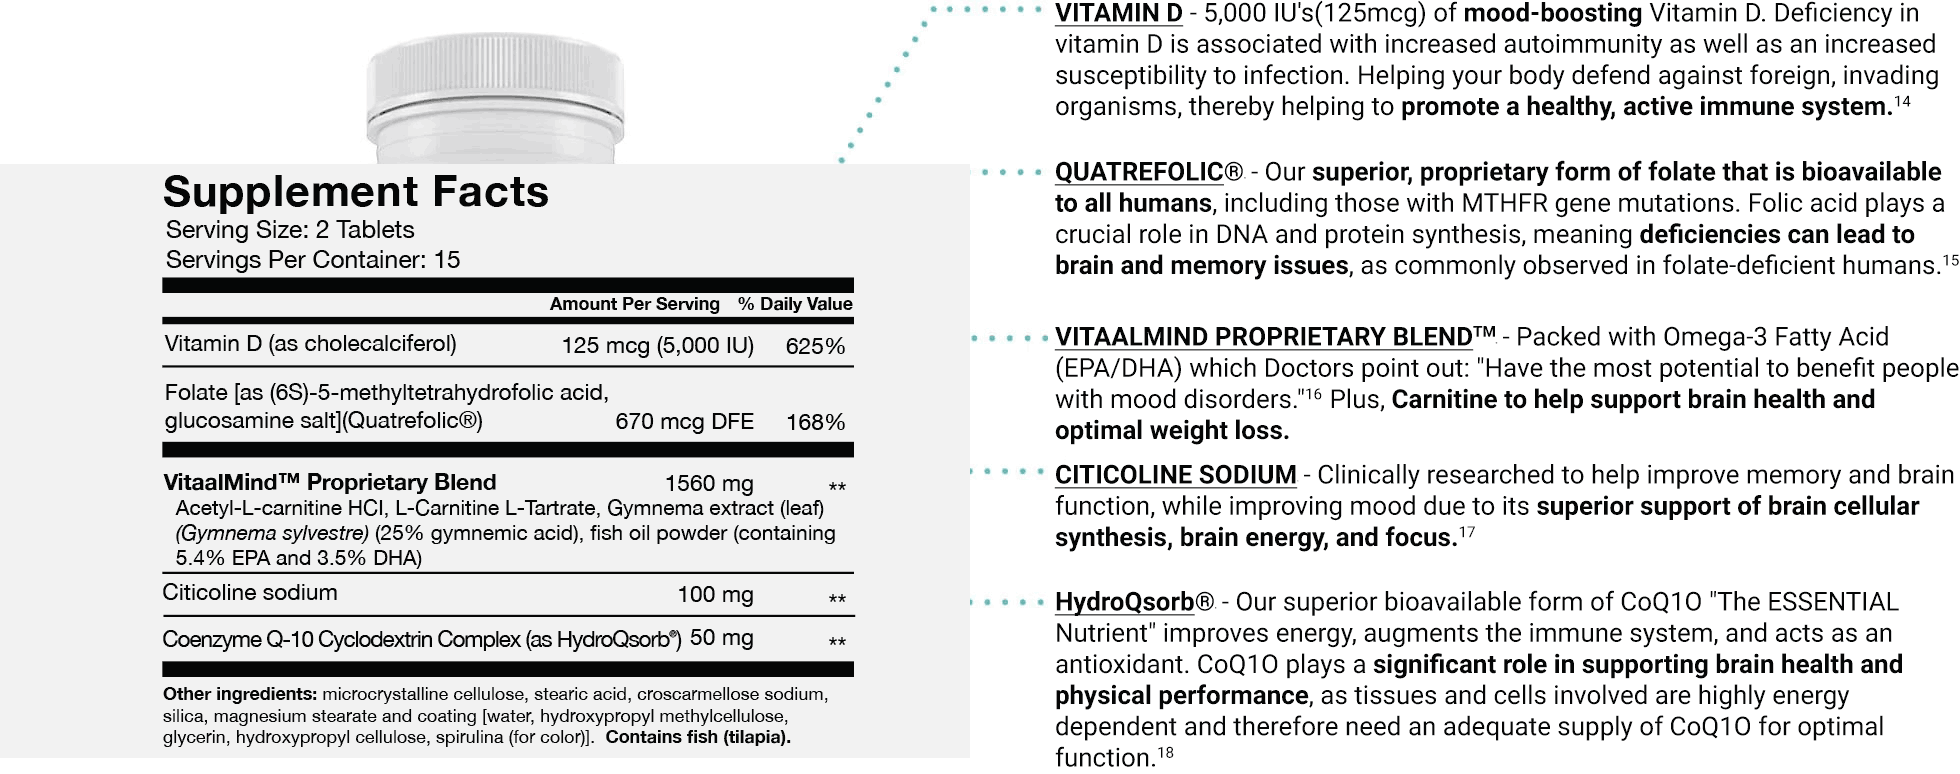 Quatrefolic® - Our superior, proprietary form of folate that is bioavailable to all humans, including those with MTHFR gene mutations. Folic acid plays a crucial role in DNA and protein synthesis, meaning deficiencies can lead to brain and memory issues, as commonly observed in folate-deficient humans.


VITAMIN D - 5,000 IU's(125mcg) of mood-boosting Vitamin D. Deficiency in vitamin D is associated with increased autoimmunity as well as an increased susceptibility to infection. Helping your body defend against foreign, invading organisms, thereby helping to promote a healthy and active immune system.

VITAALMIND PROPRIETARY BLEND™ - Packed with Omega-3 Fatty Acid (EPA/DHA) which Doctors point out: 'Have the most potential to benefit people with mood disorders.'

CITICOLINE - Clinically researched to help improve memory and brain function, while improving mood due to its superior support of brain cellular synthesis, brain energy, and focus.

HydroQsorb® CoQ1O - Our superior bioavailable form of CoQ1O 'The ESSENTIAL Nutrient' improves energy, augments the immune system, and acts as an antioxidant. CoQ1O plays a significant role in supporting brain health and physical performance, as tissues and cells involved are highly energy-dependent and therefore require an adequate supply of CoQ1O for optimal function.